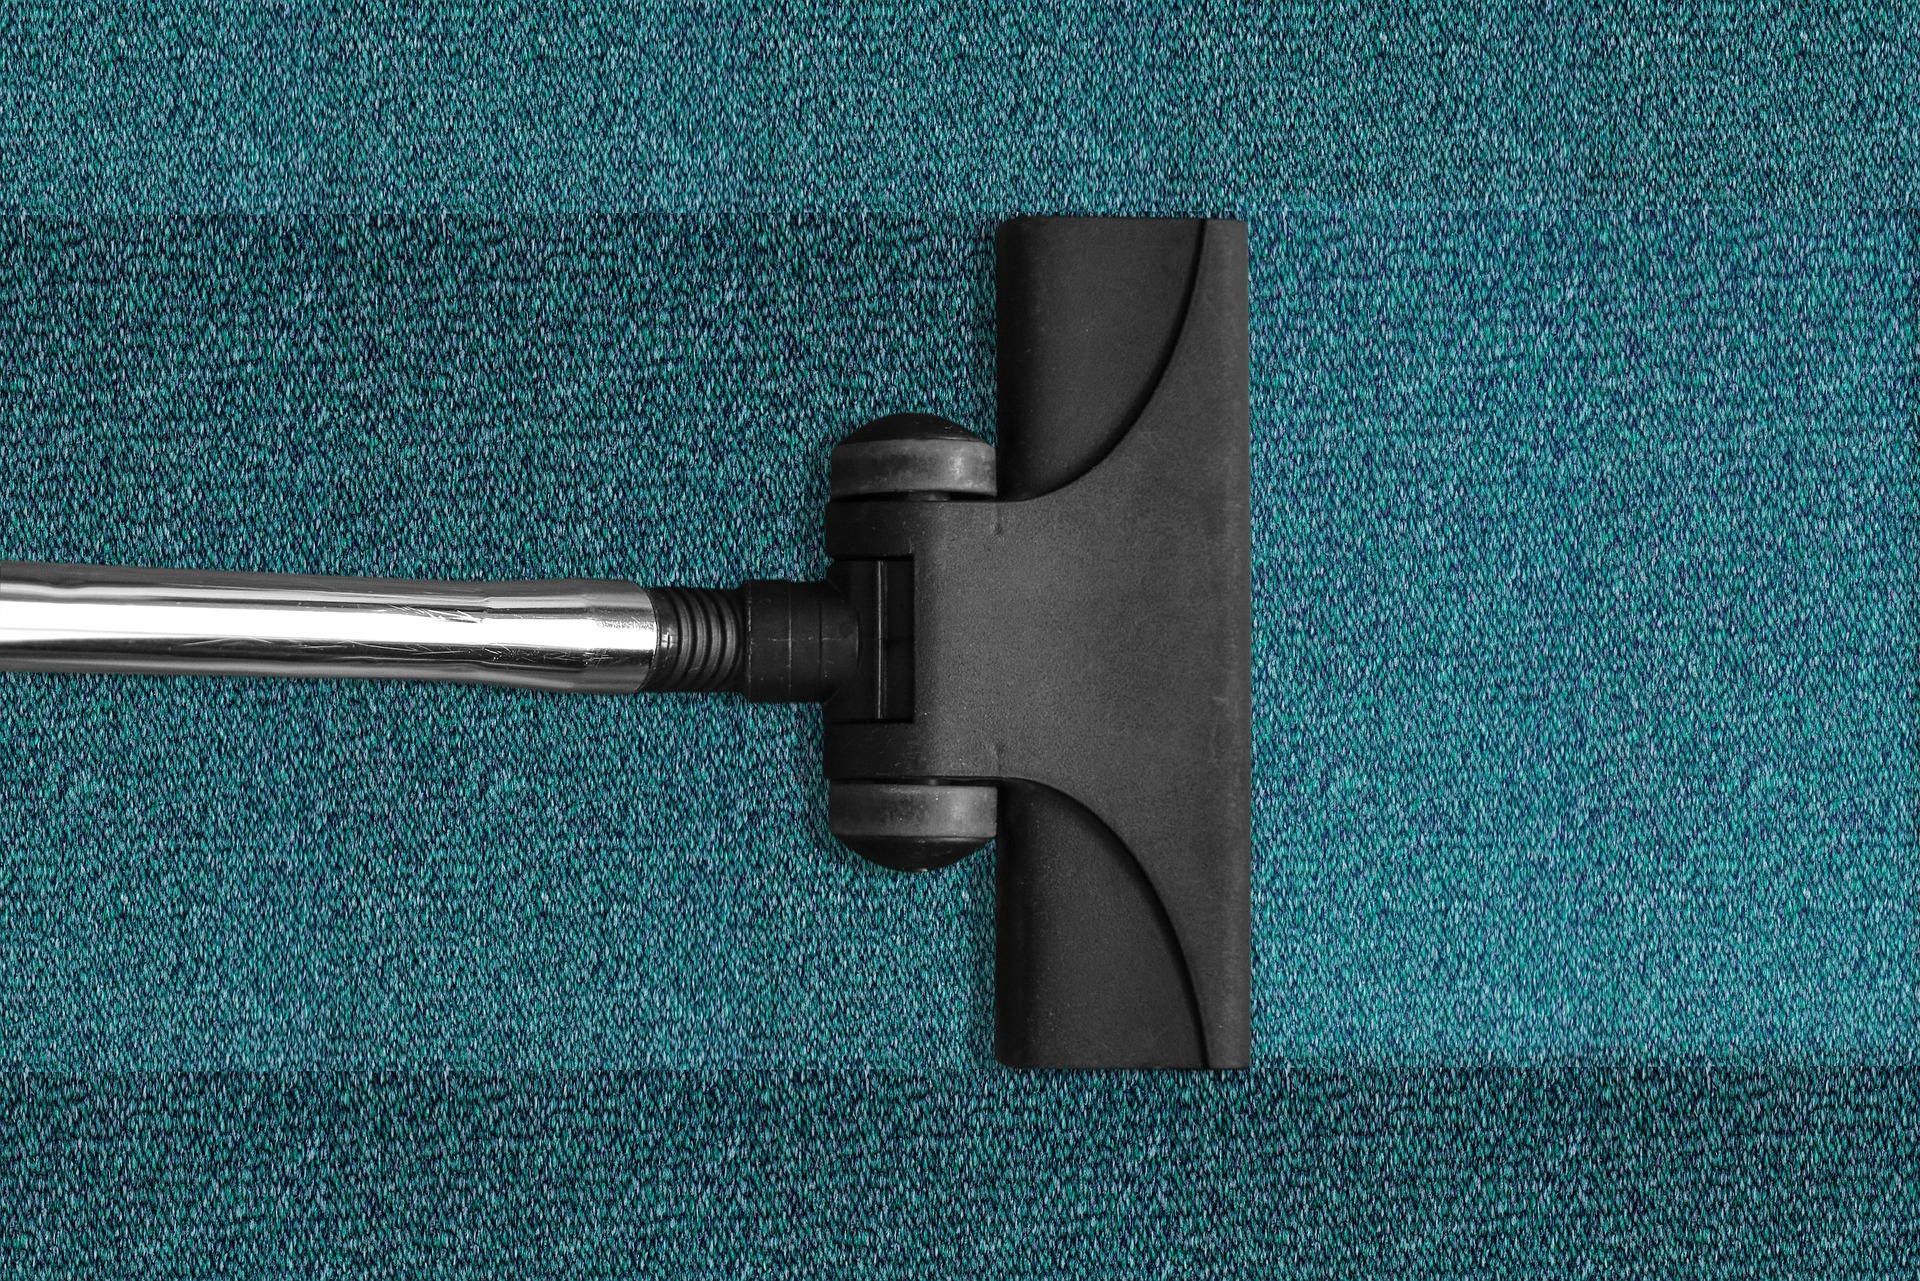 Commercial janitorial cleaning with a vacuum cleaner on carpet